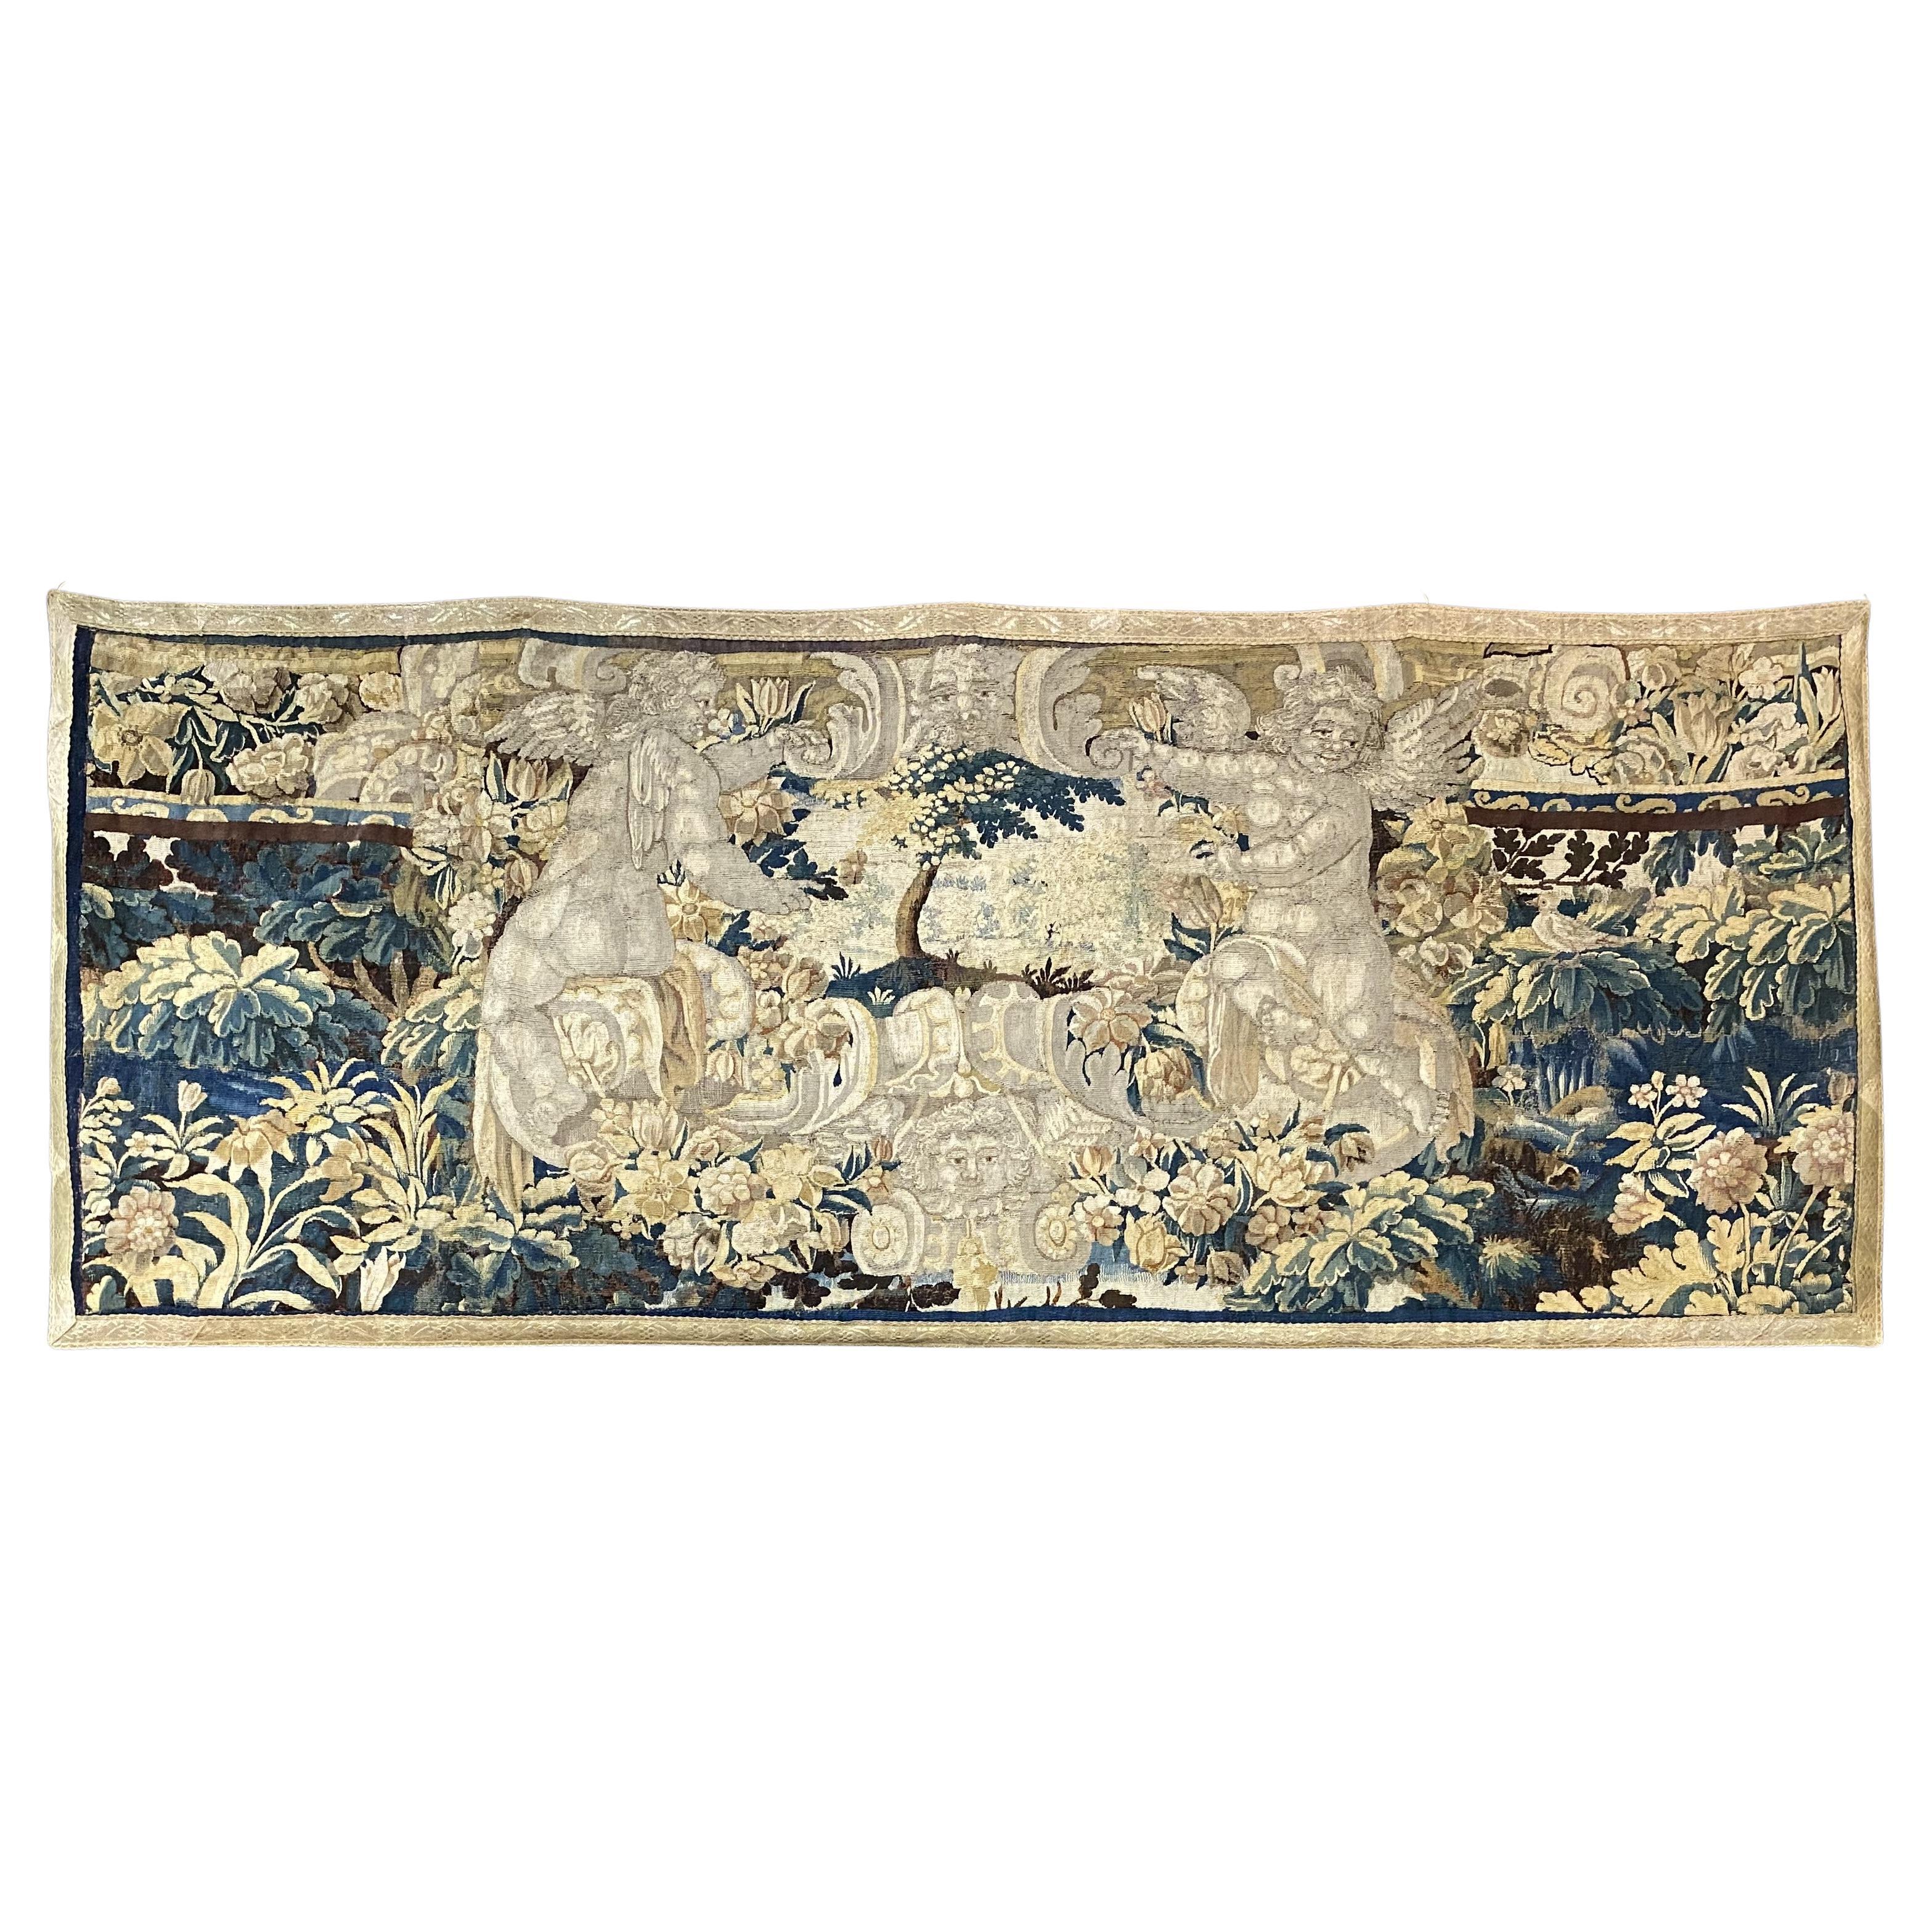 18th Century Tapestries - 215 For Sale at 1stDibs